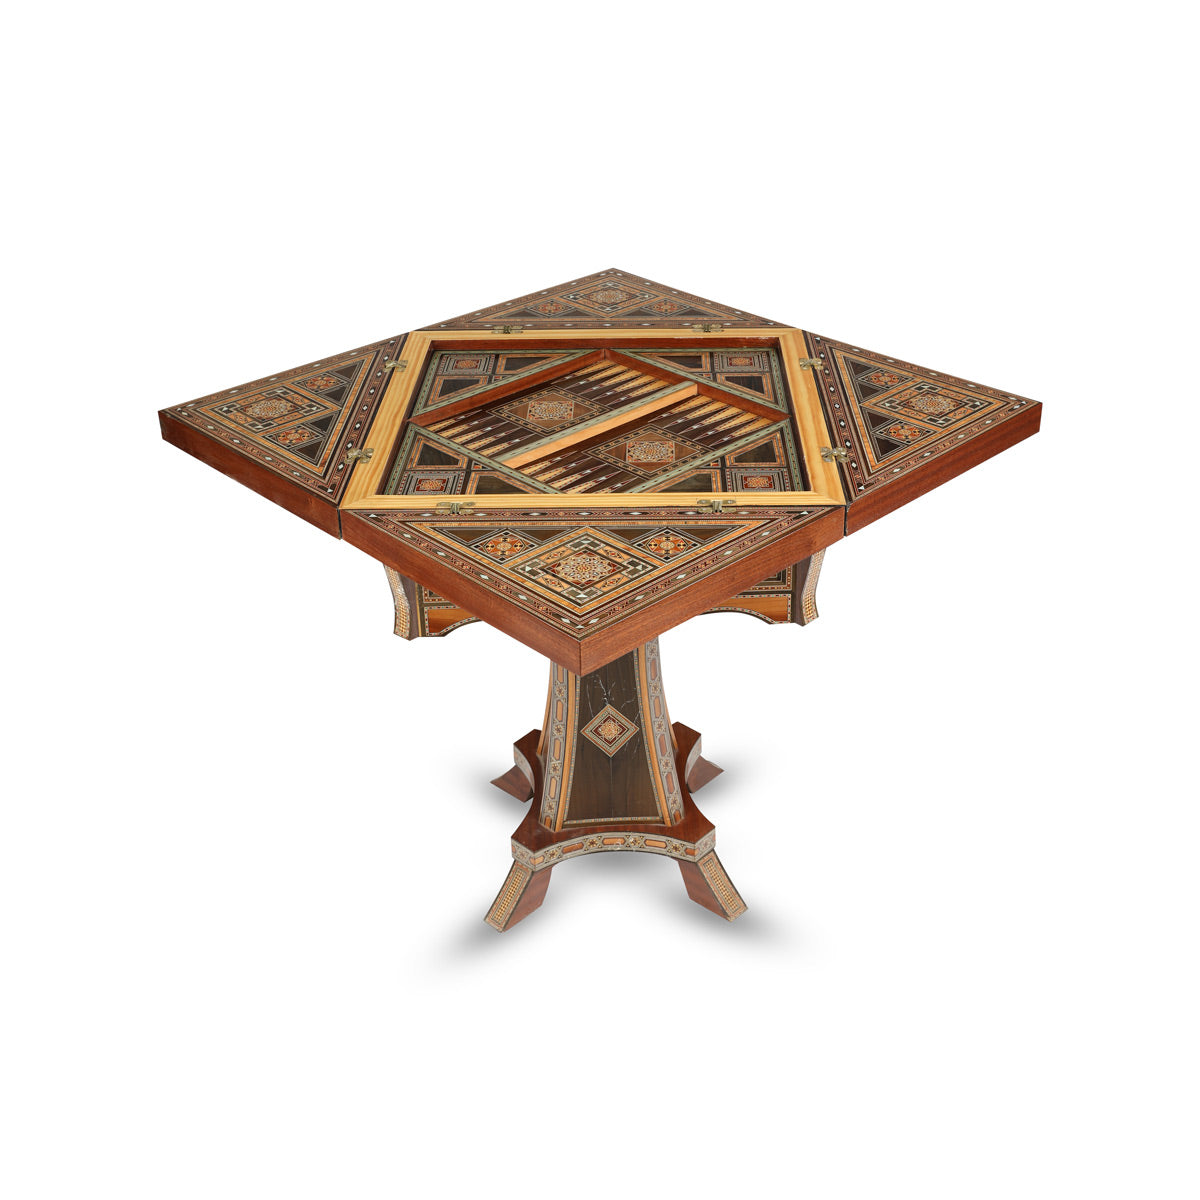 Side Angled View of Foldable Gaming Mosaic Patterned Marquetry Inlaid Table With Open Backgammon Game Board